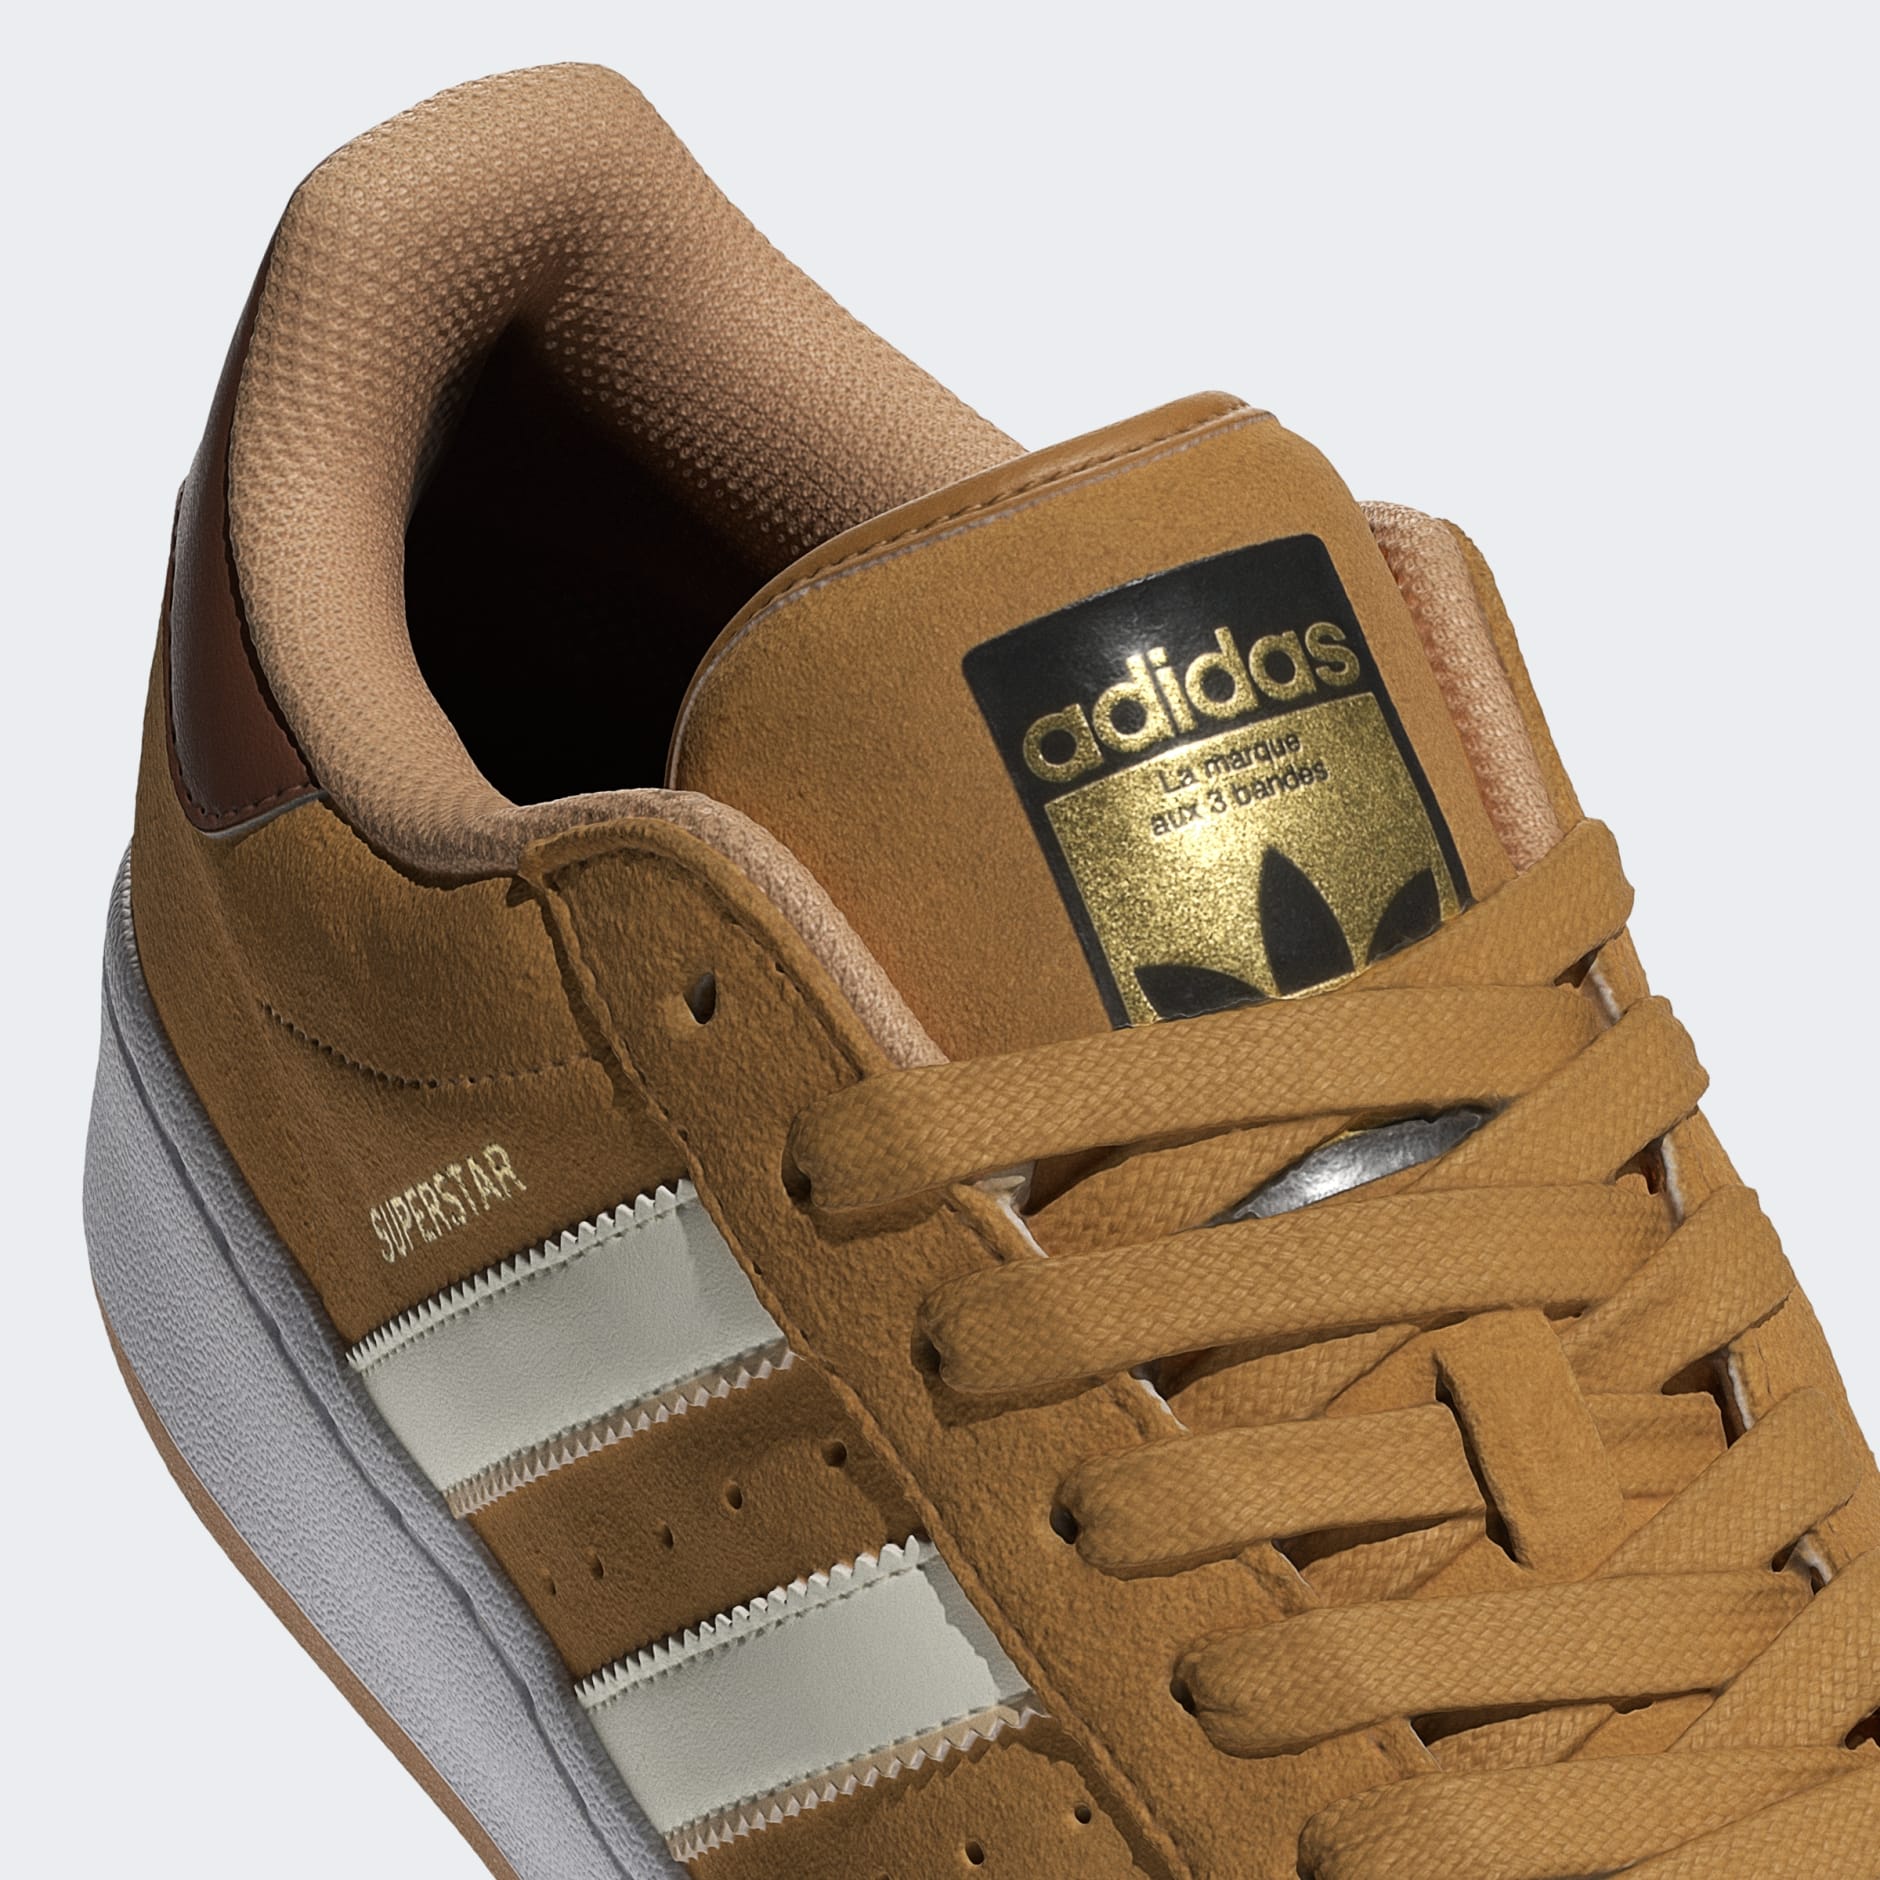 Adidas Samba OG sneakers for Men - Brown in UAE | Level Shoes